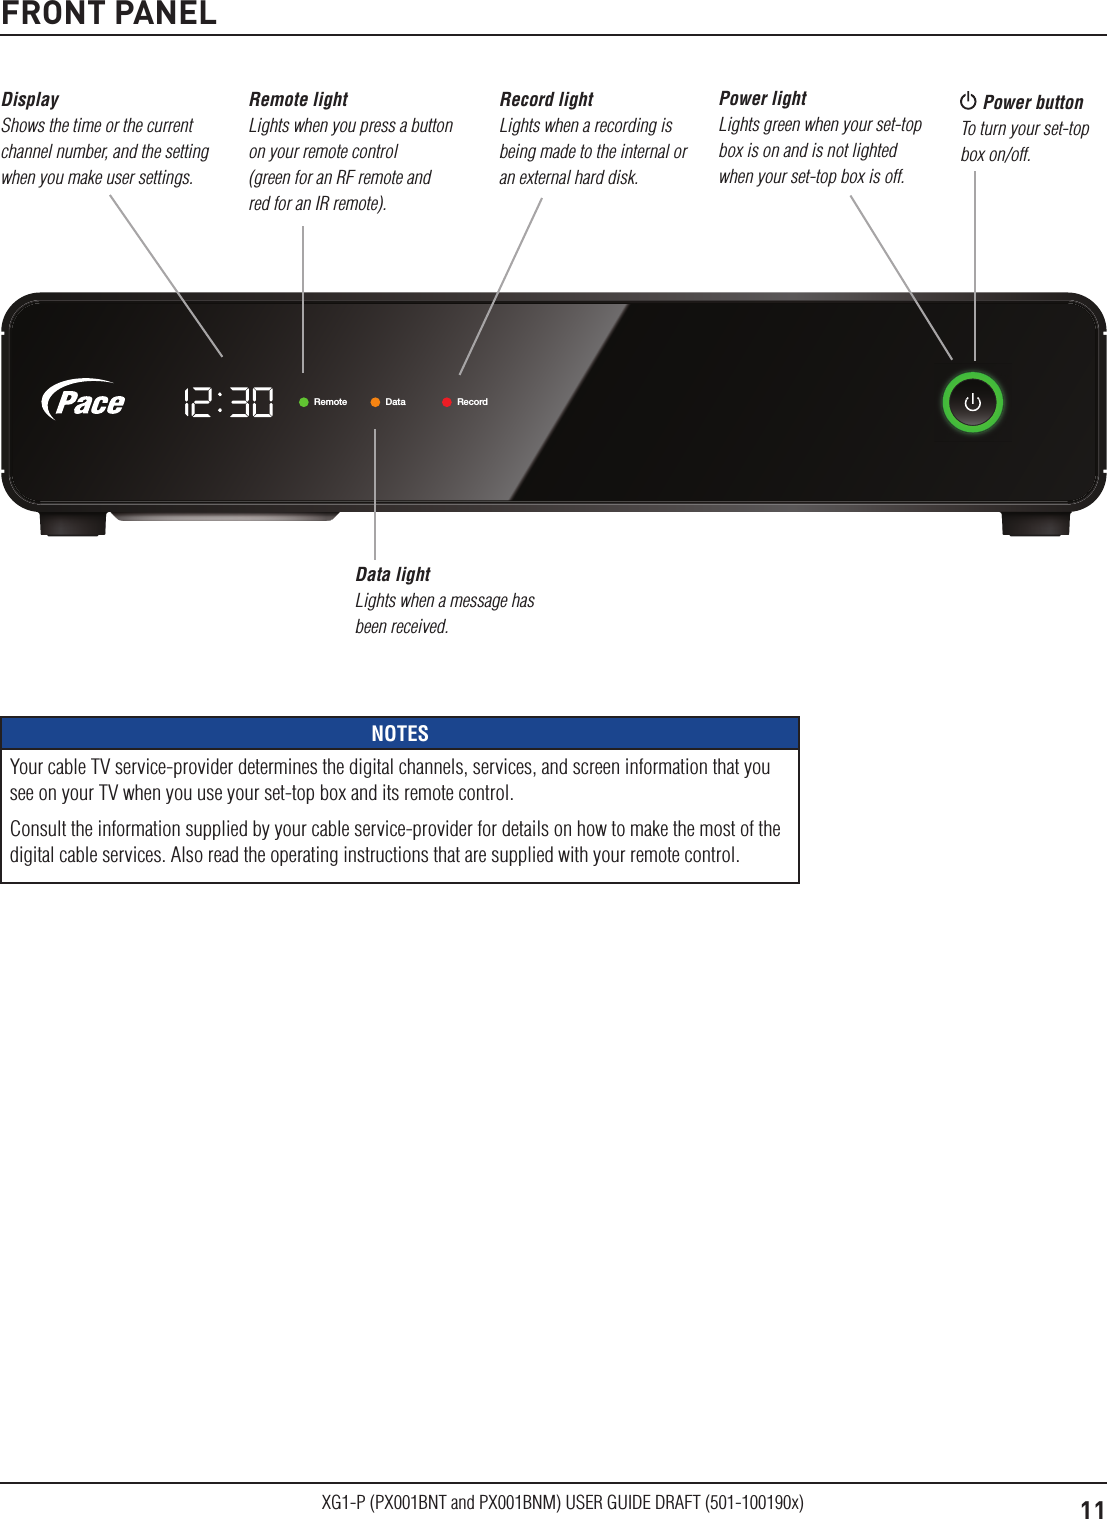 11XG1-P (PX001BNT and PX001BNM) USER GUIDE DRAFT (501-100190x)FRONT PANELRemote Data Record Power button To turn your set-top box on/off.Power light Lights green when your set-top box is on and is not lighted when your set-top box is off. Display Shows the time or the current channel number, and the setting when you make user settings.Remote light Lights when you press a button on your remote control  (green for an RF remote and red for an IR remote). Record light Lights when a recording is being made to the internal or an external hard disk. Data light Lights when a message has been received. NOTESYour cable TV service-provider determines the digital channels, services, and screen information that you see on your TV when you use your set-top box and its remote control.Consult the information supplied by your cable service-provider for details on how to make the most of the digital cable services. Also read the operating instructions that are supplied with your remote control.